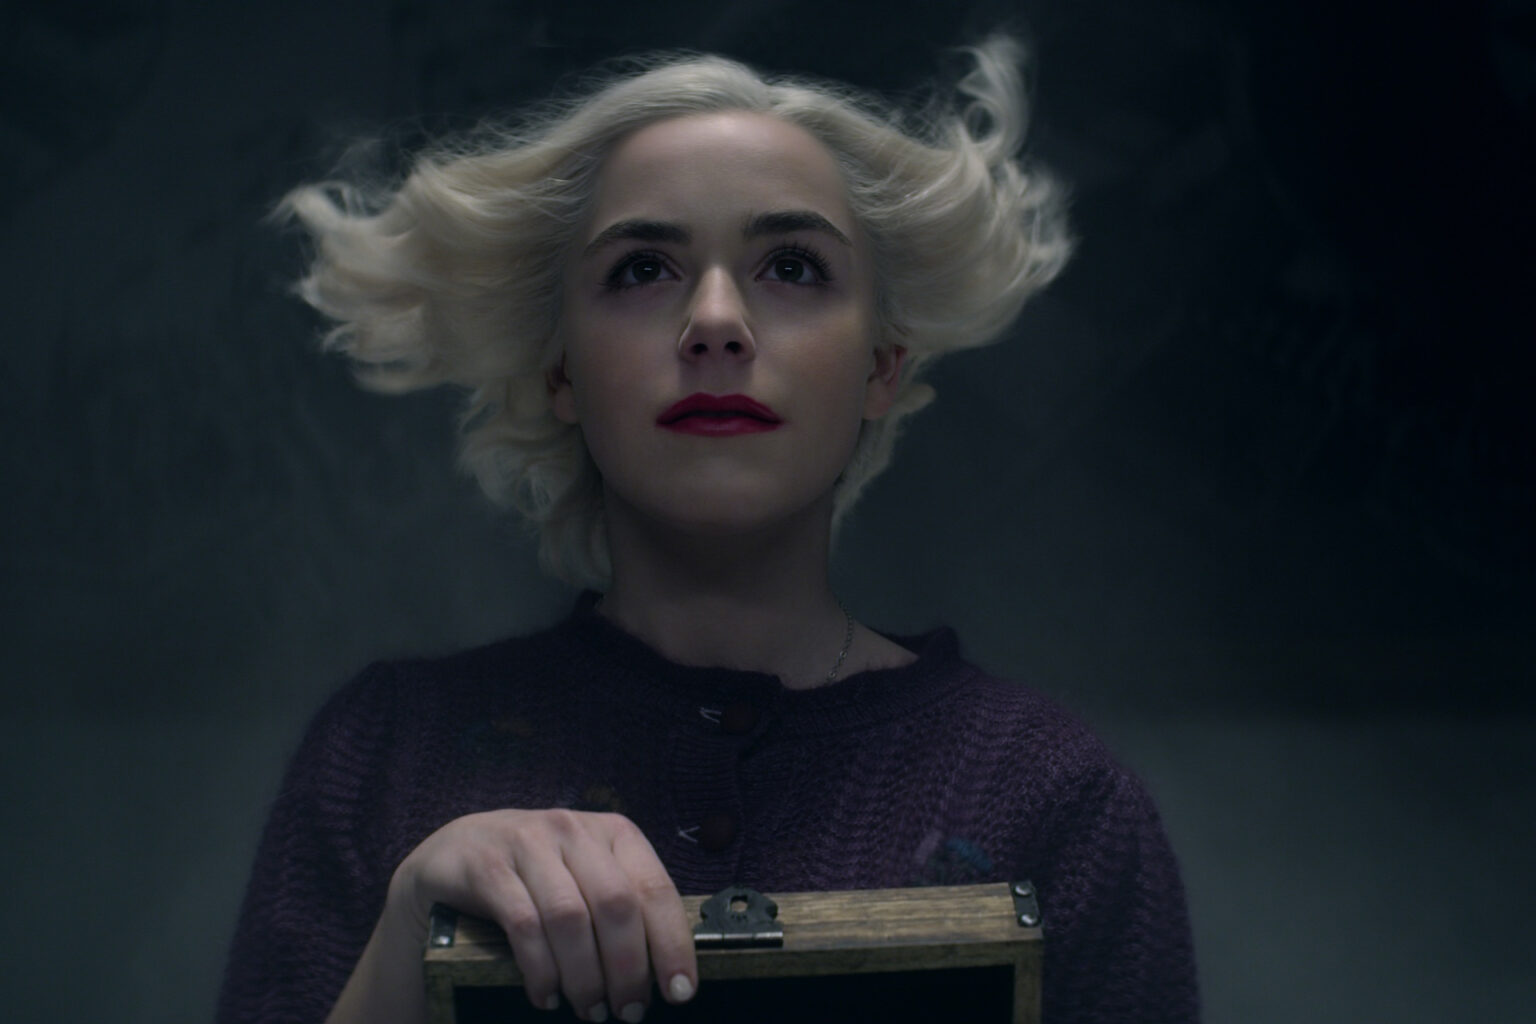 Here’s why we want to save Sabrina and why we think 'Chilling Adventures of Sabrina' shouldn’t end after season 4.